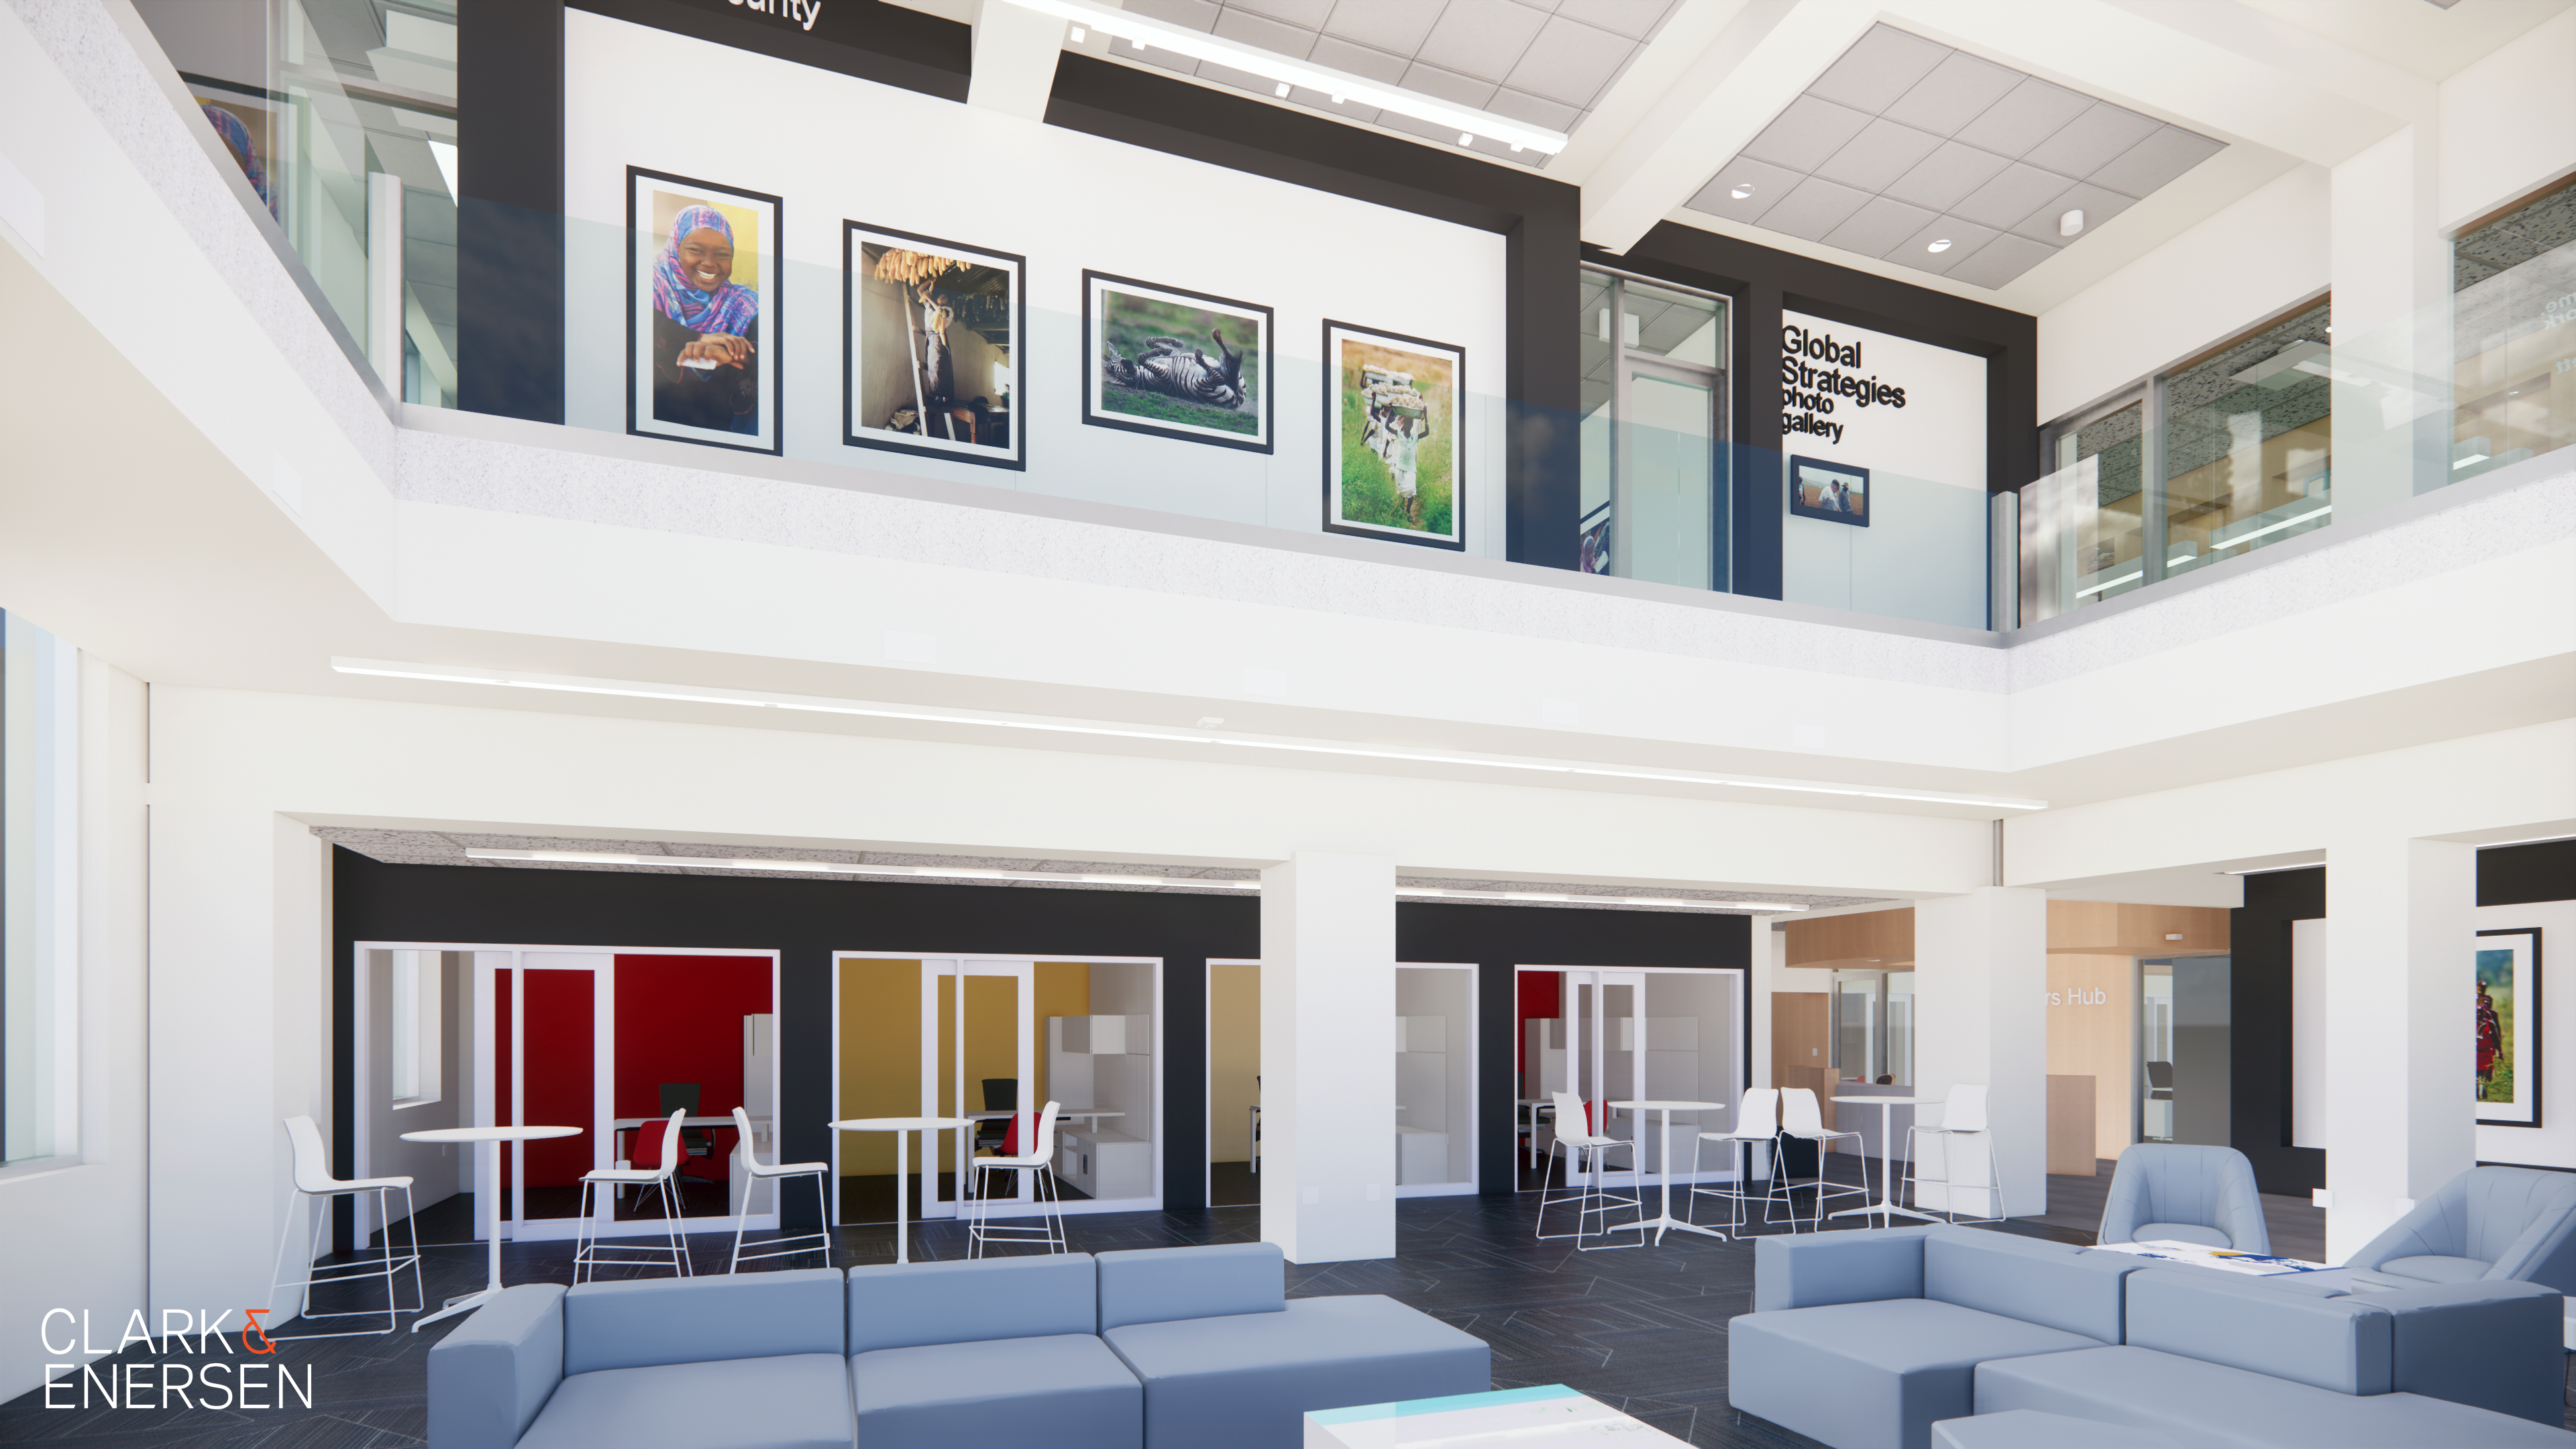 rendering of the global education space shows the photo gallery and interactive meeting spaces